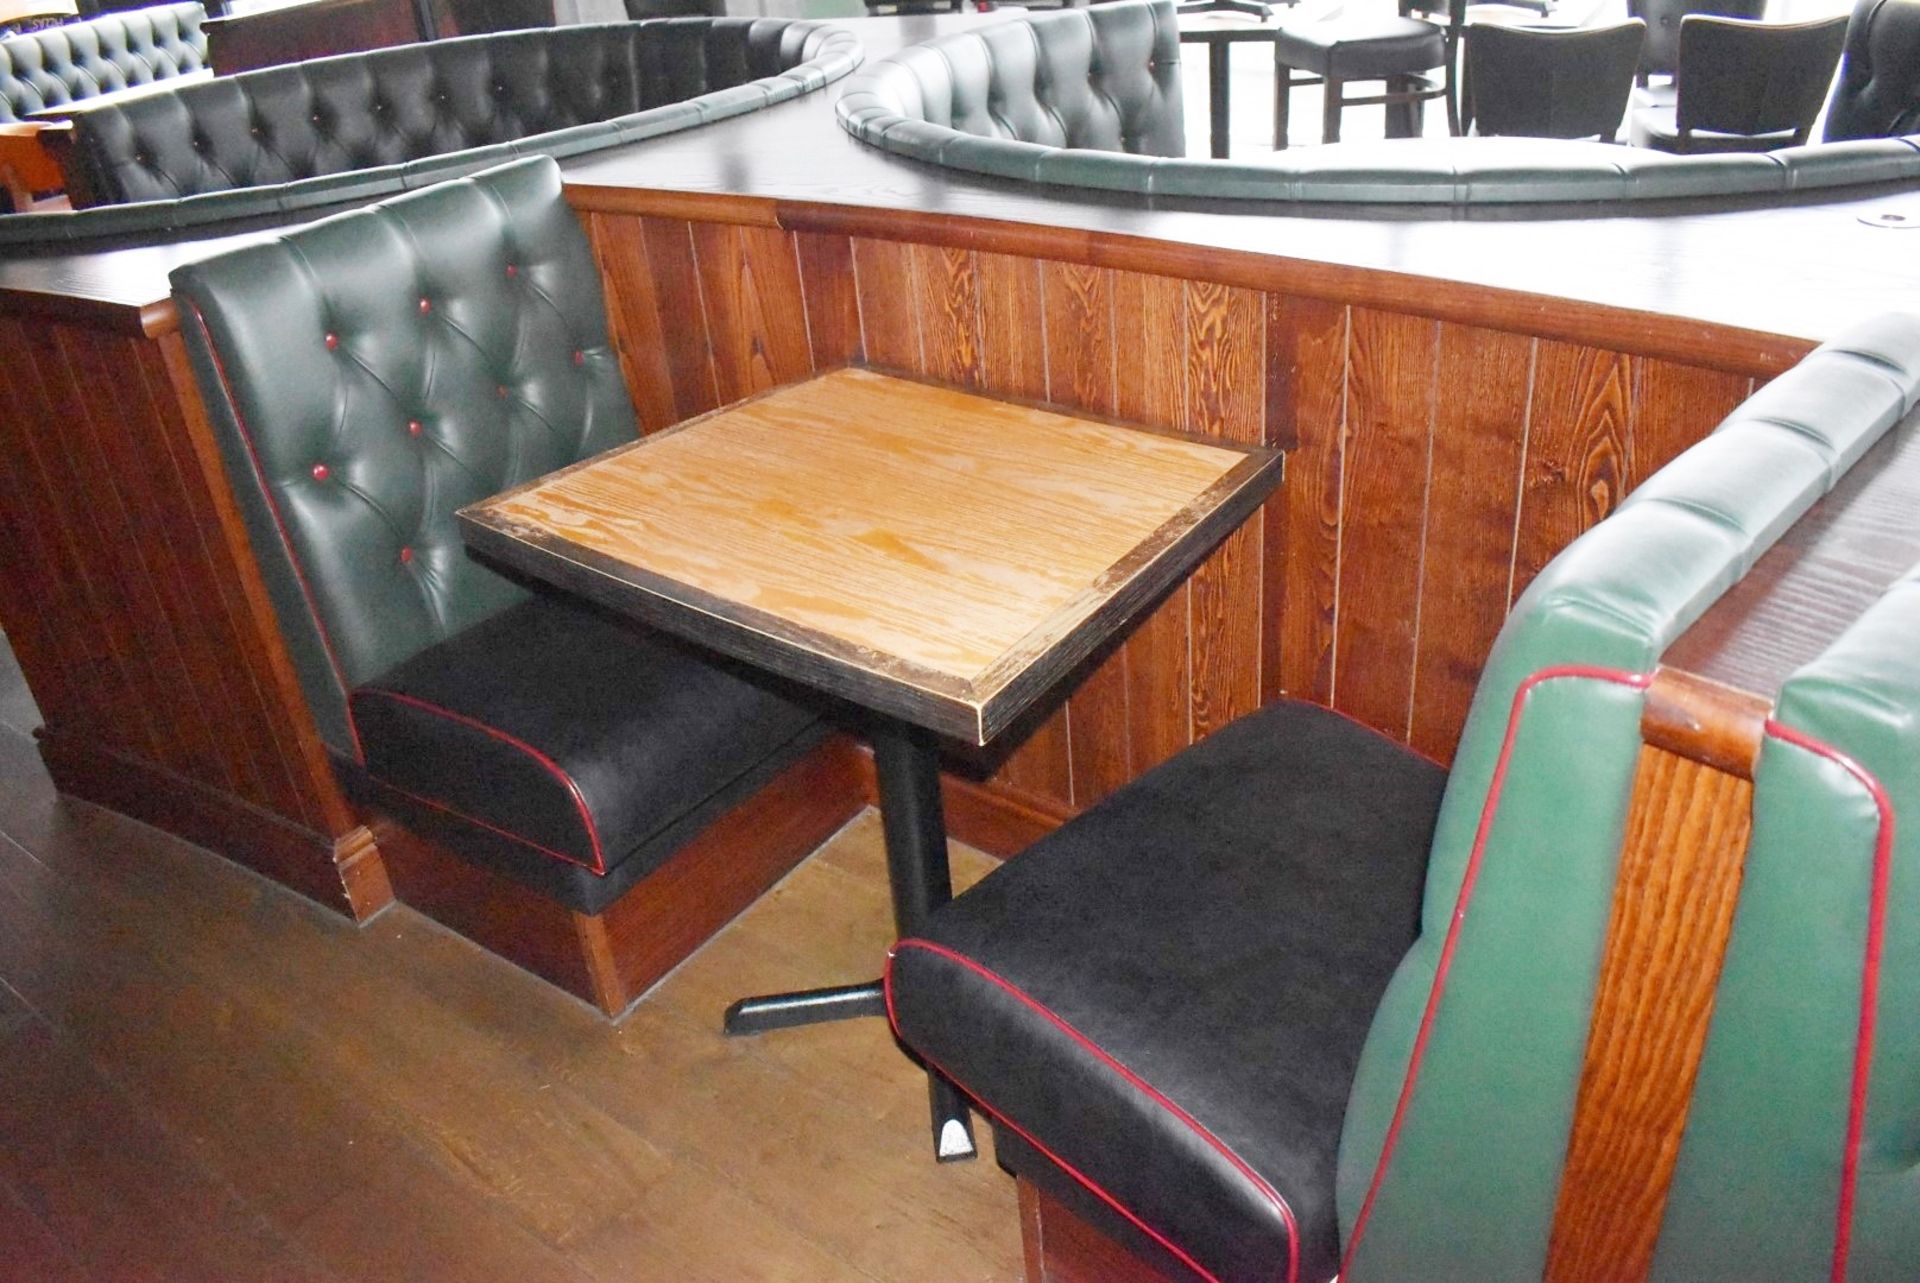 3 x Sections of Restaurant Single Seat Booth Seating With 2 x Tables - Image 6 of 9